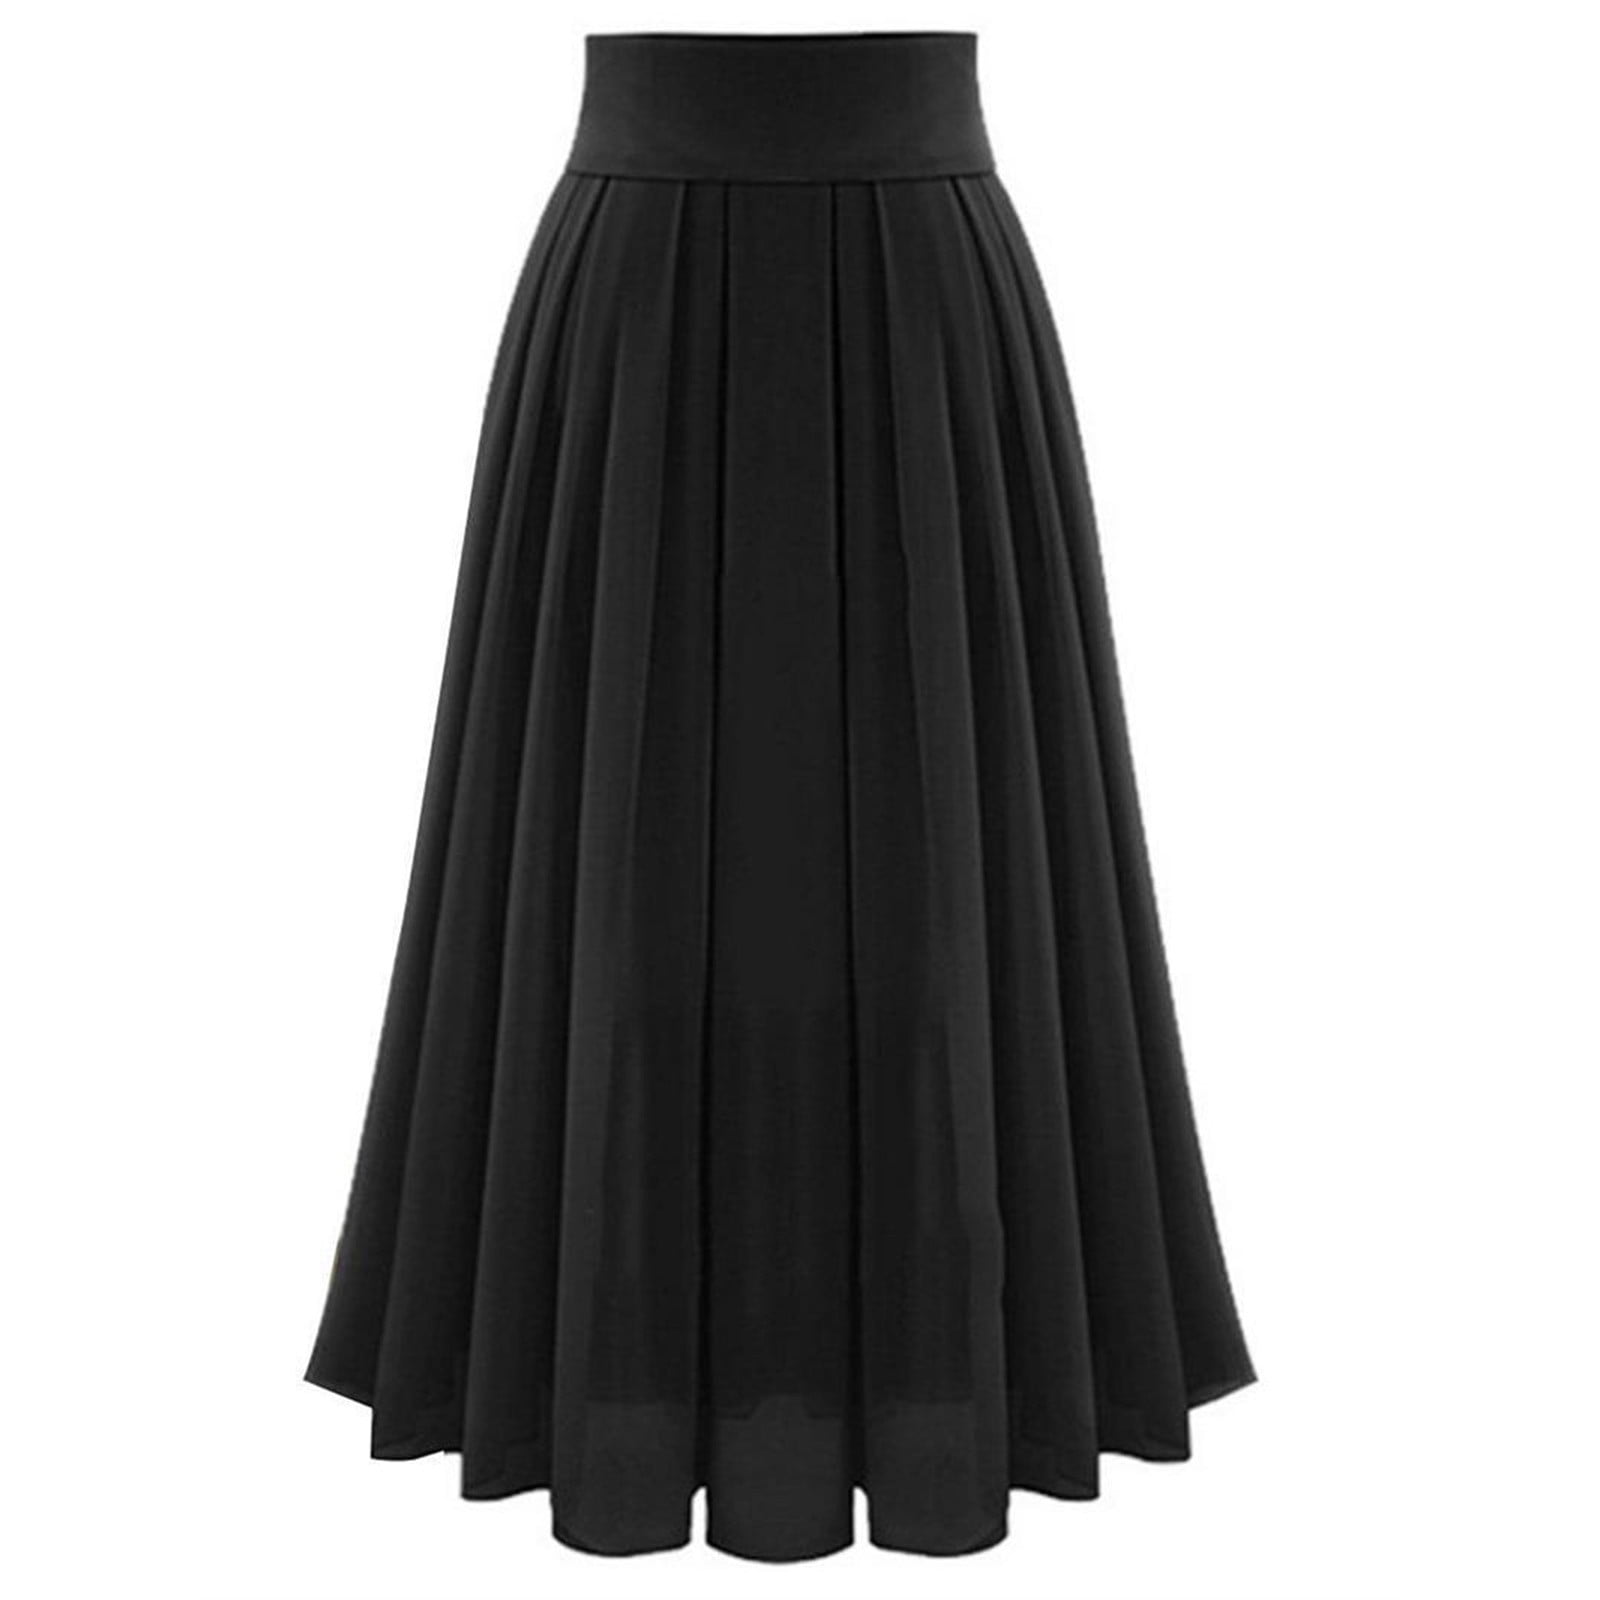 Fall Savings Clearance! ITSUN Skirts for Women,Women's Sexy Party ...